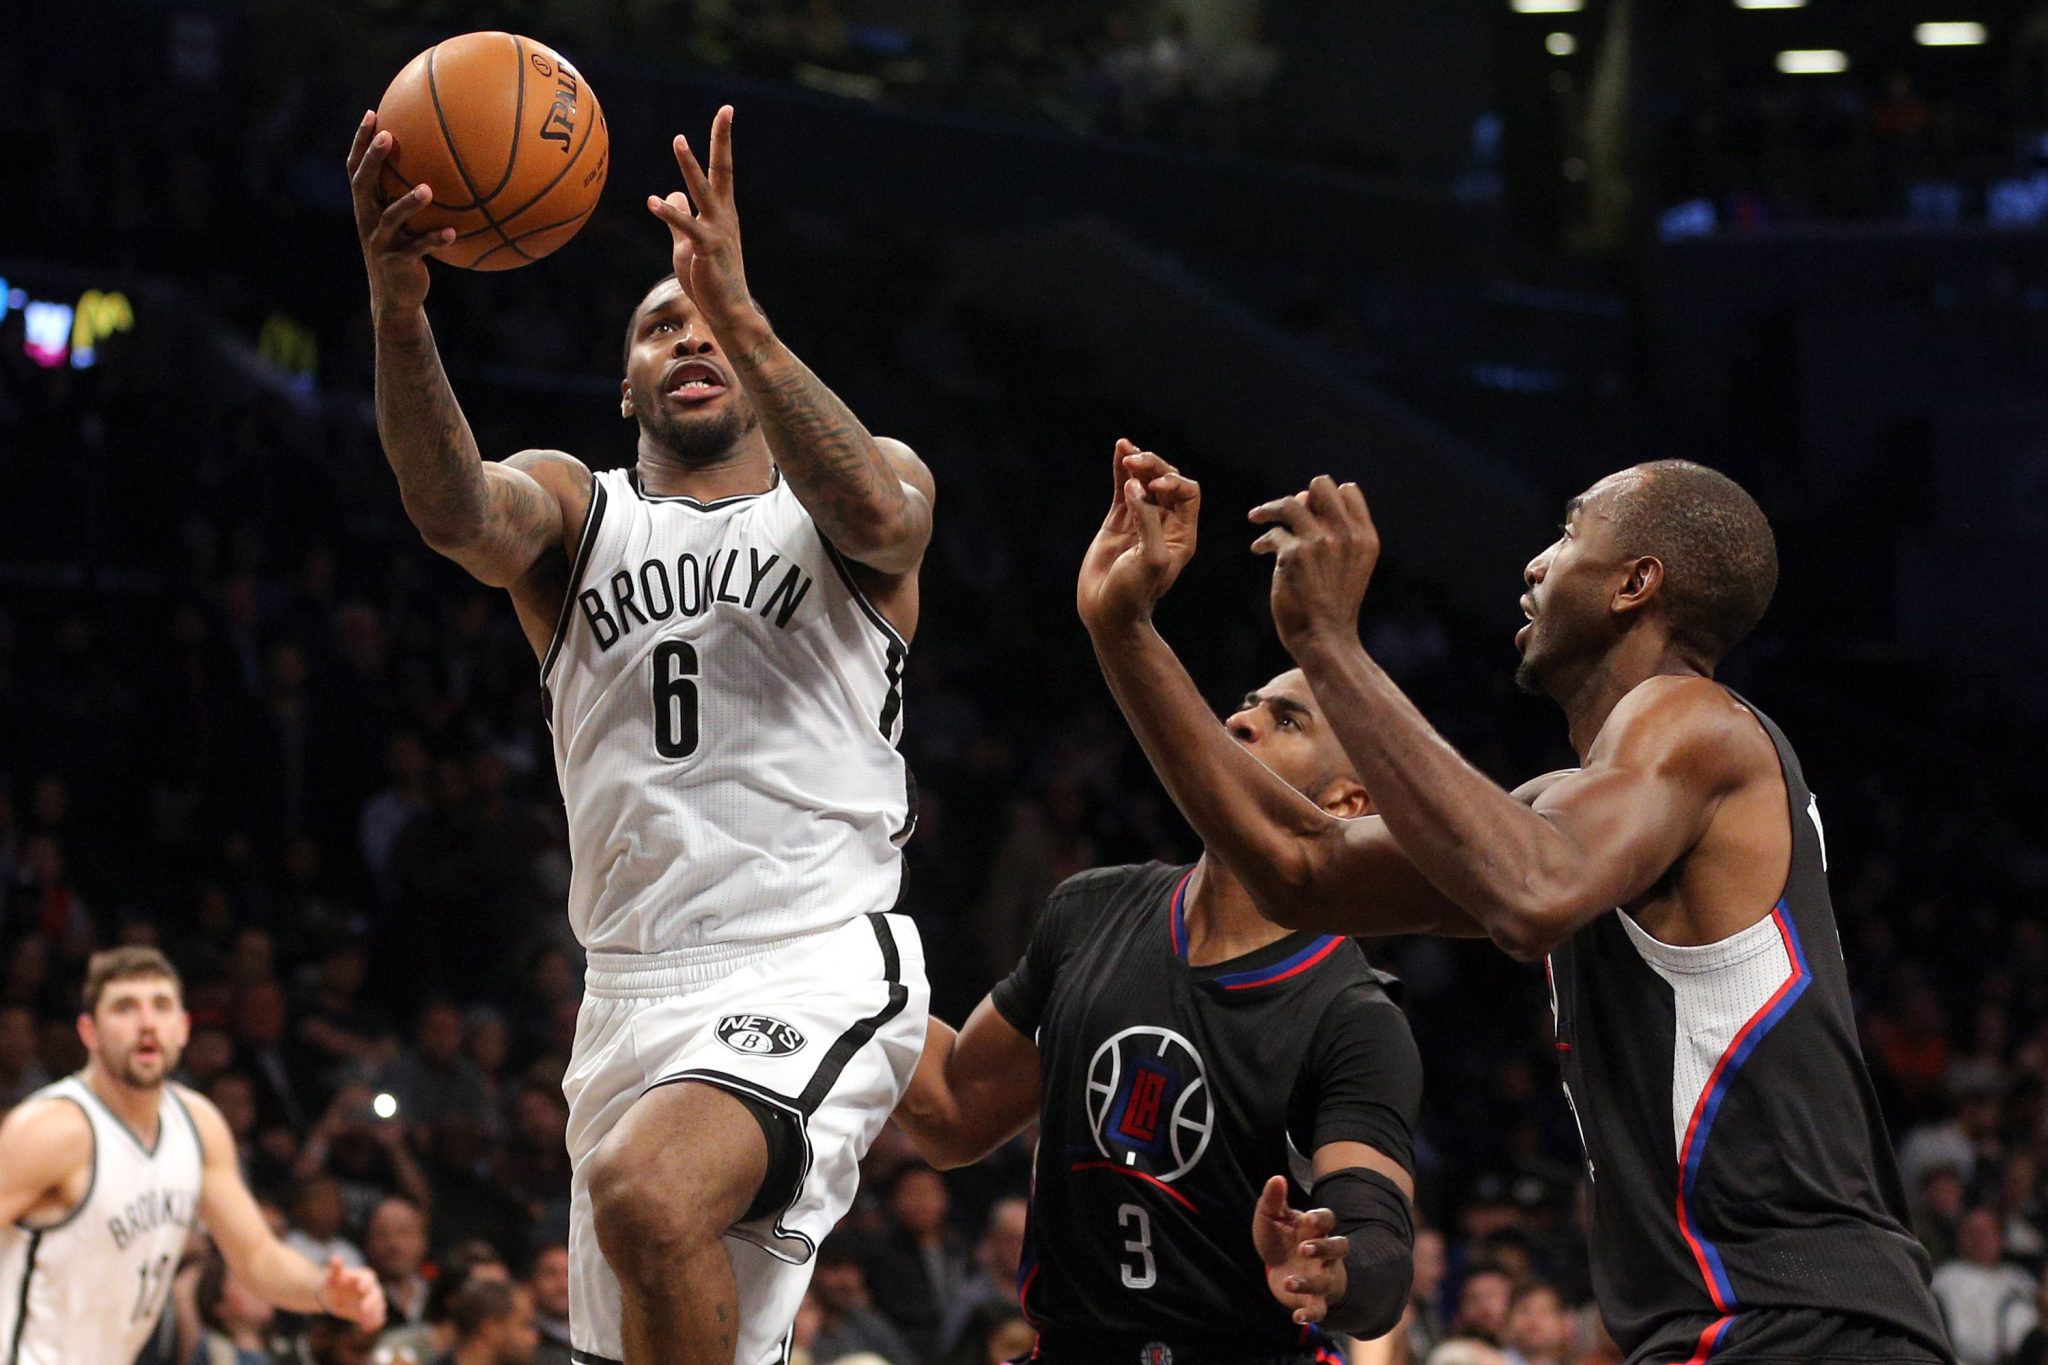 Sean Kilpatrick shows potential, inexperience against Clippers 3